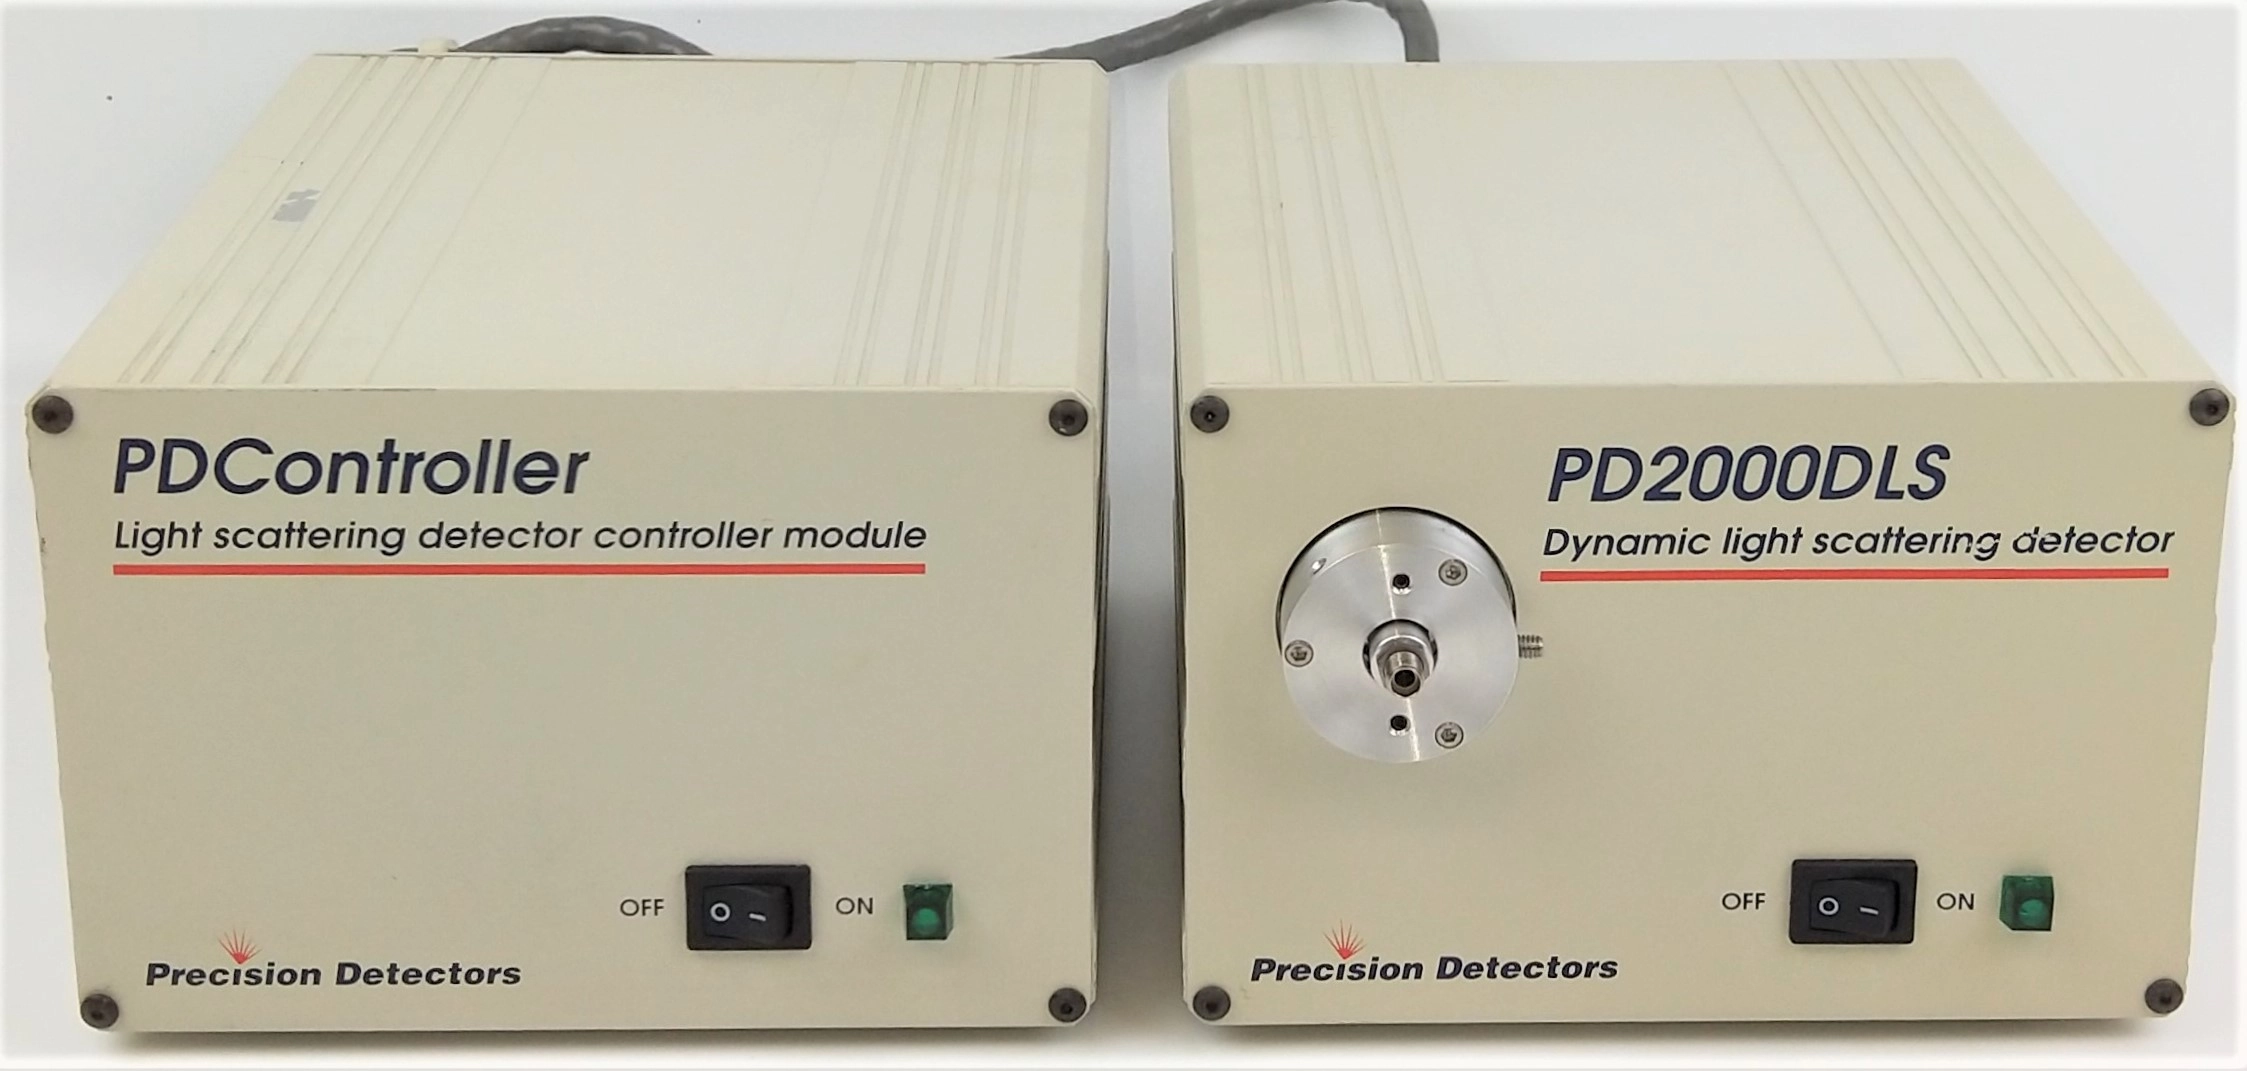 Precision Detectors PD2000DLS Dynamic Light Scattering Detector with PD Controller